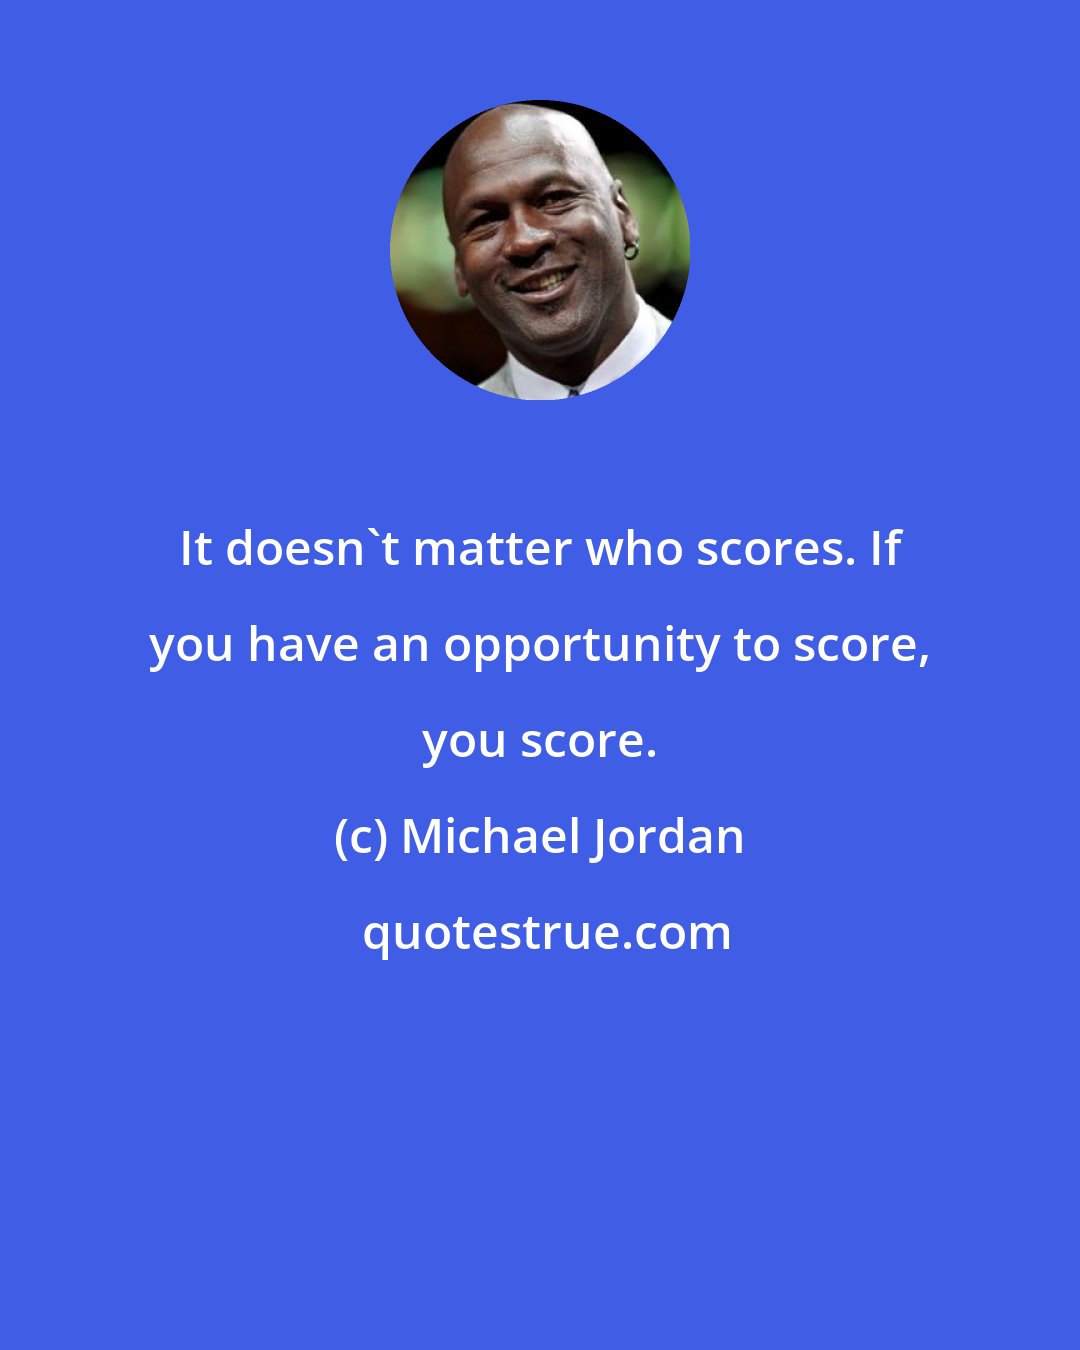 Michael Jordan: It doesn't matter who scores. If you have an opportunity to score, you score.